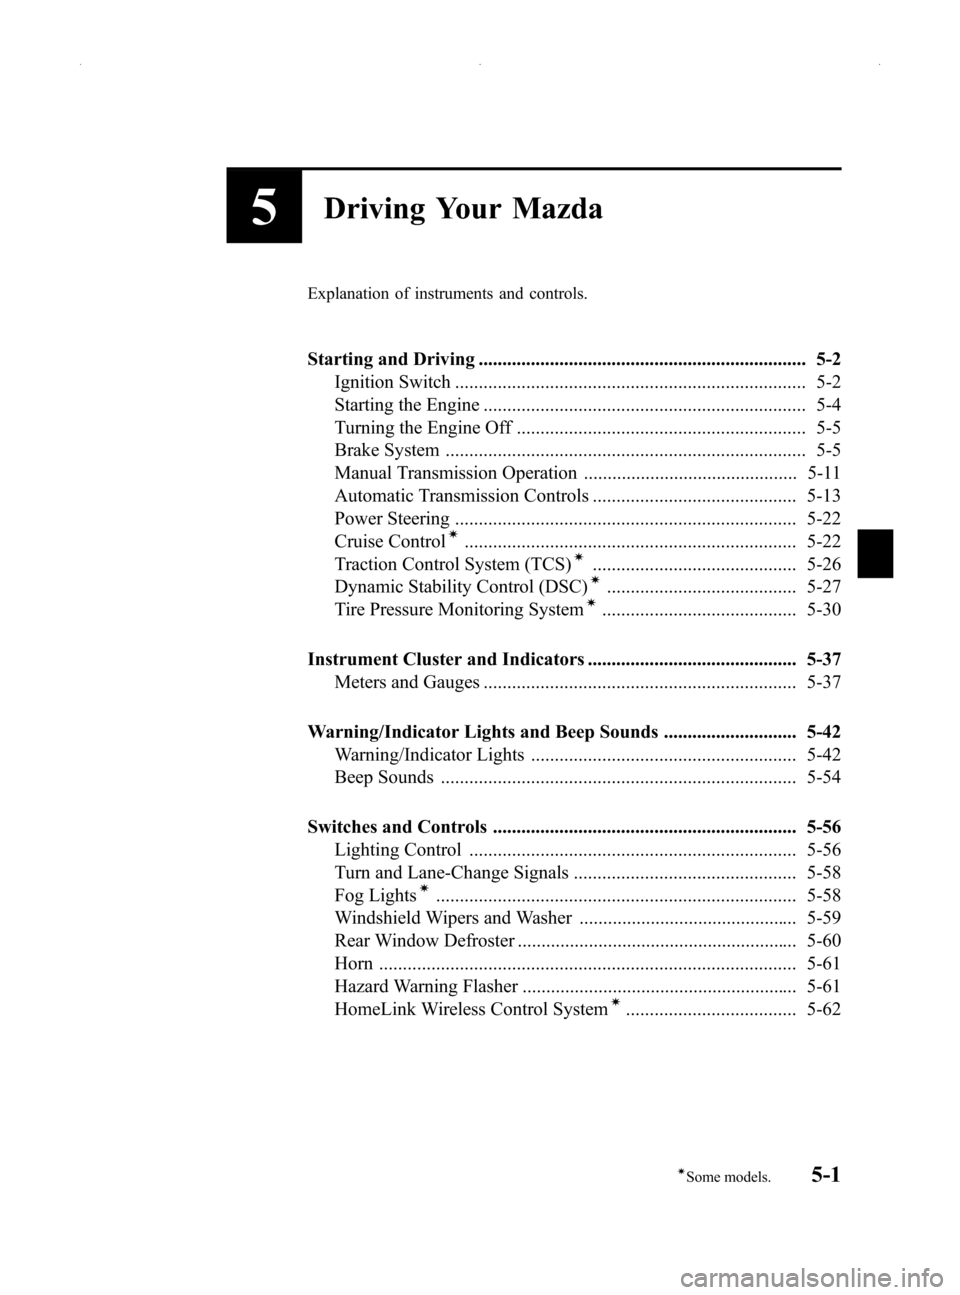 MAZDA MODEL MX-5 2014  Owners Manual (in English) Black plate (145,1)
5Driving Your Mazda
Explanation of instruments and controls.
Starting and Driving ..................................................................... 5-2Ignition Switch .........